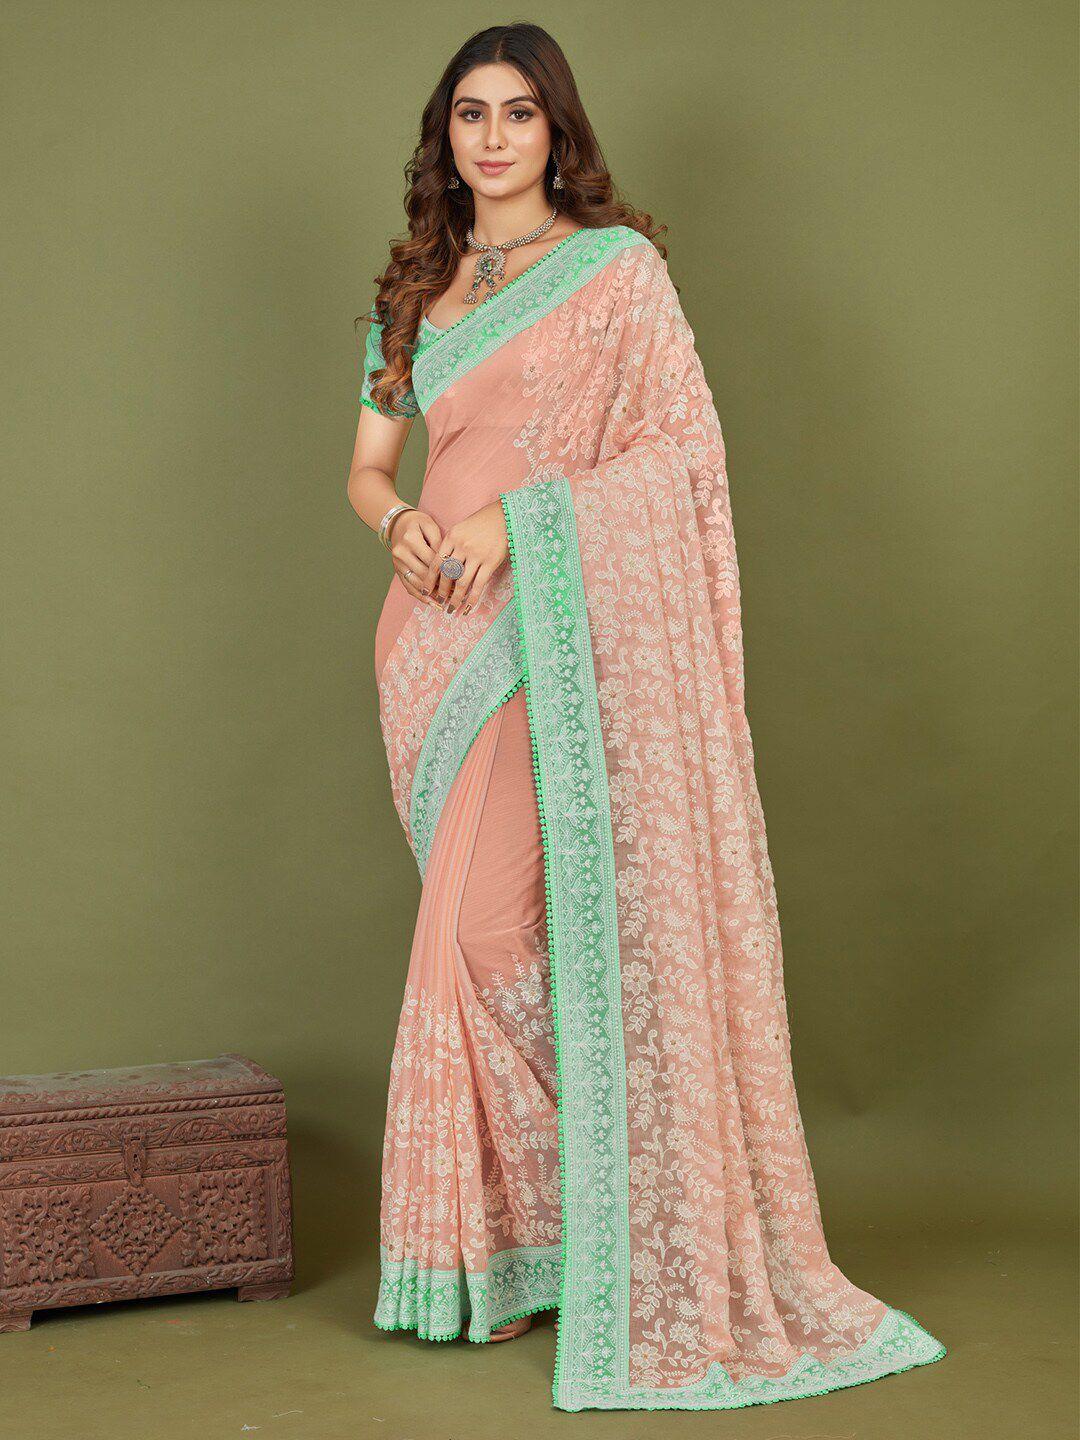 saree mall rose gold & green floral embroidered pure chiffon sarees